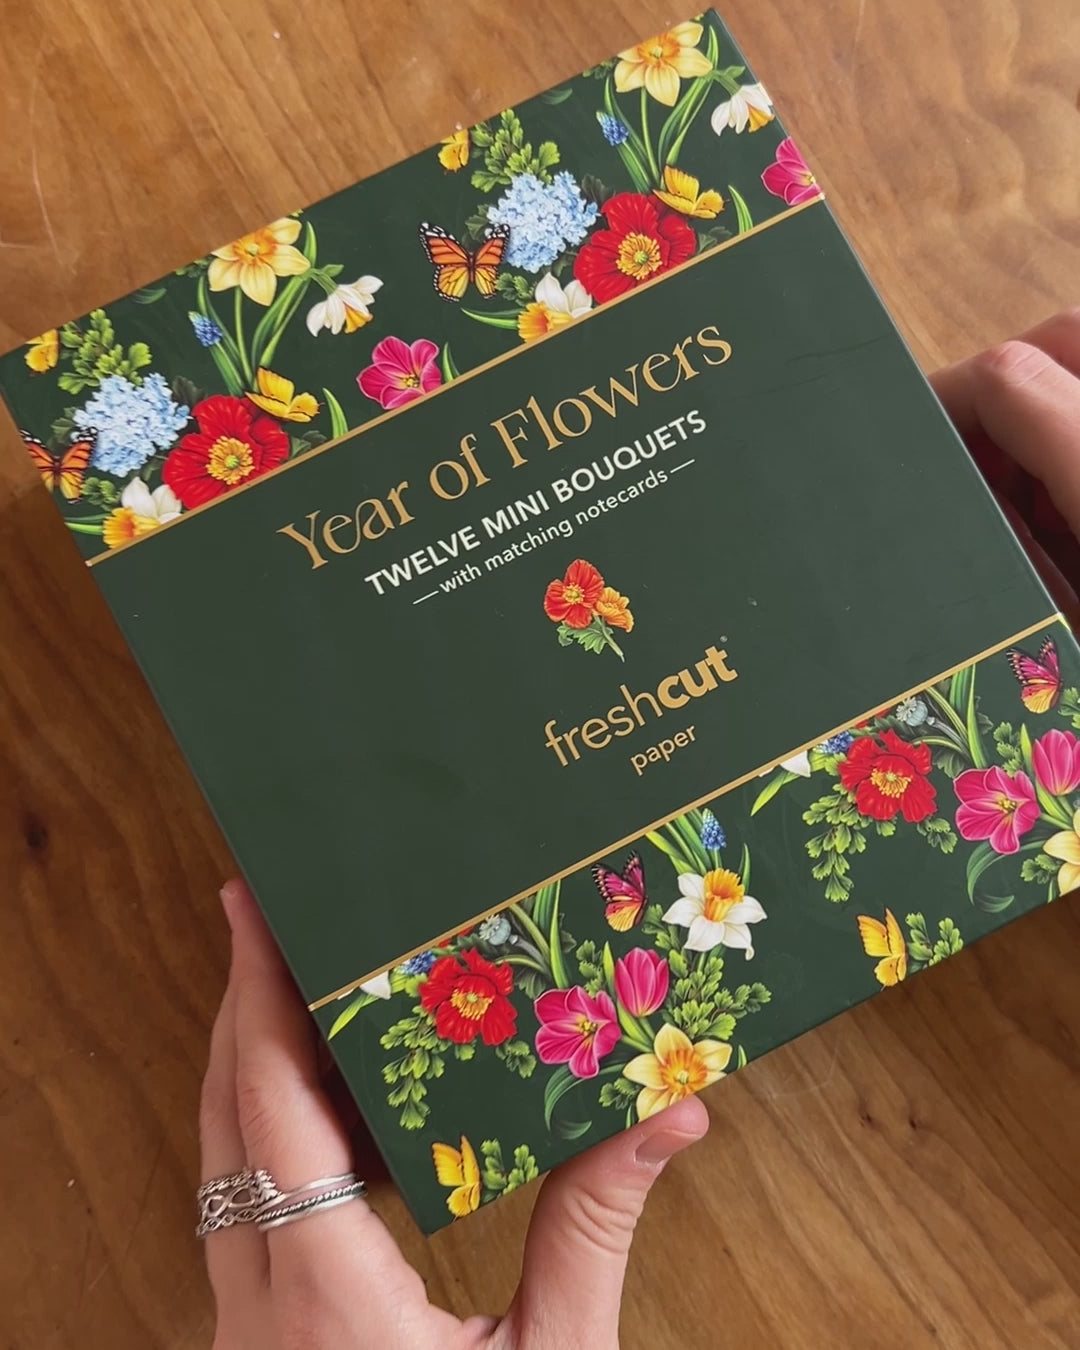 year of flowers boxed set of mini bouquets